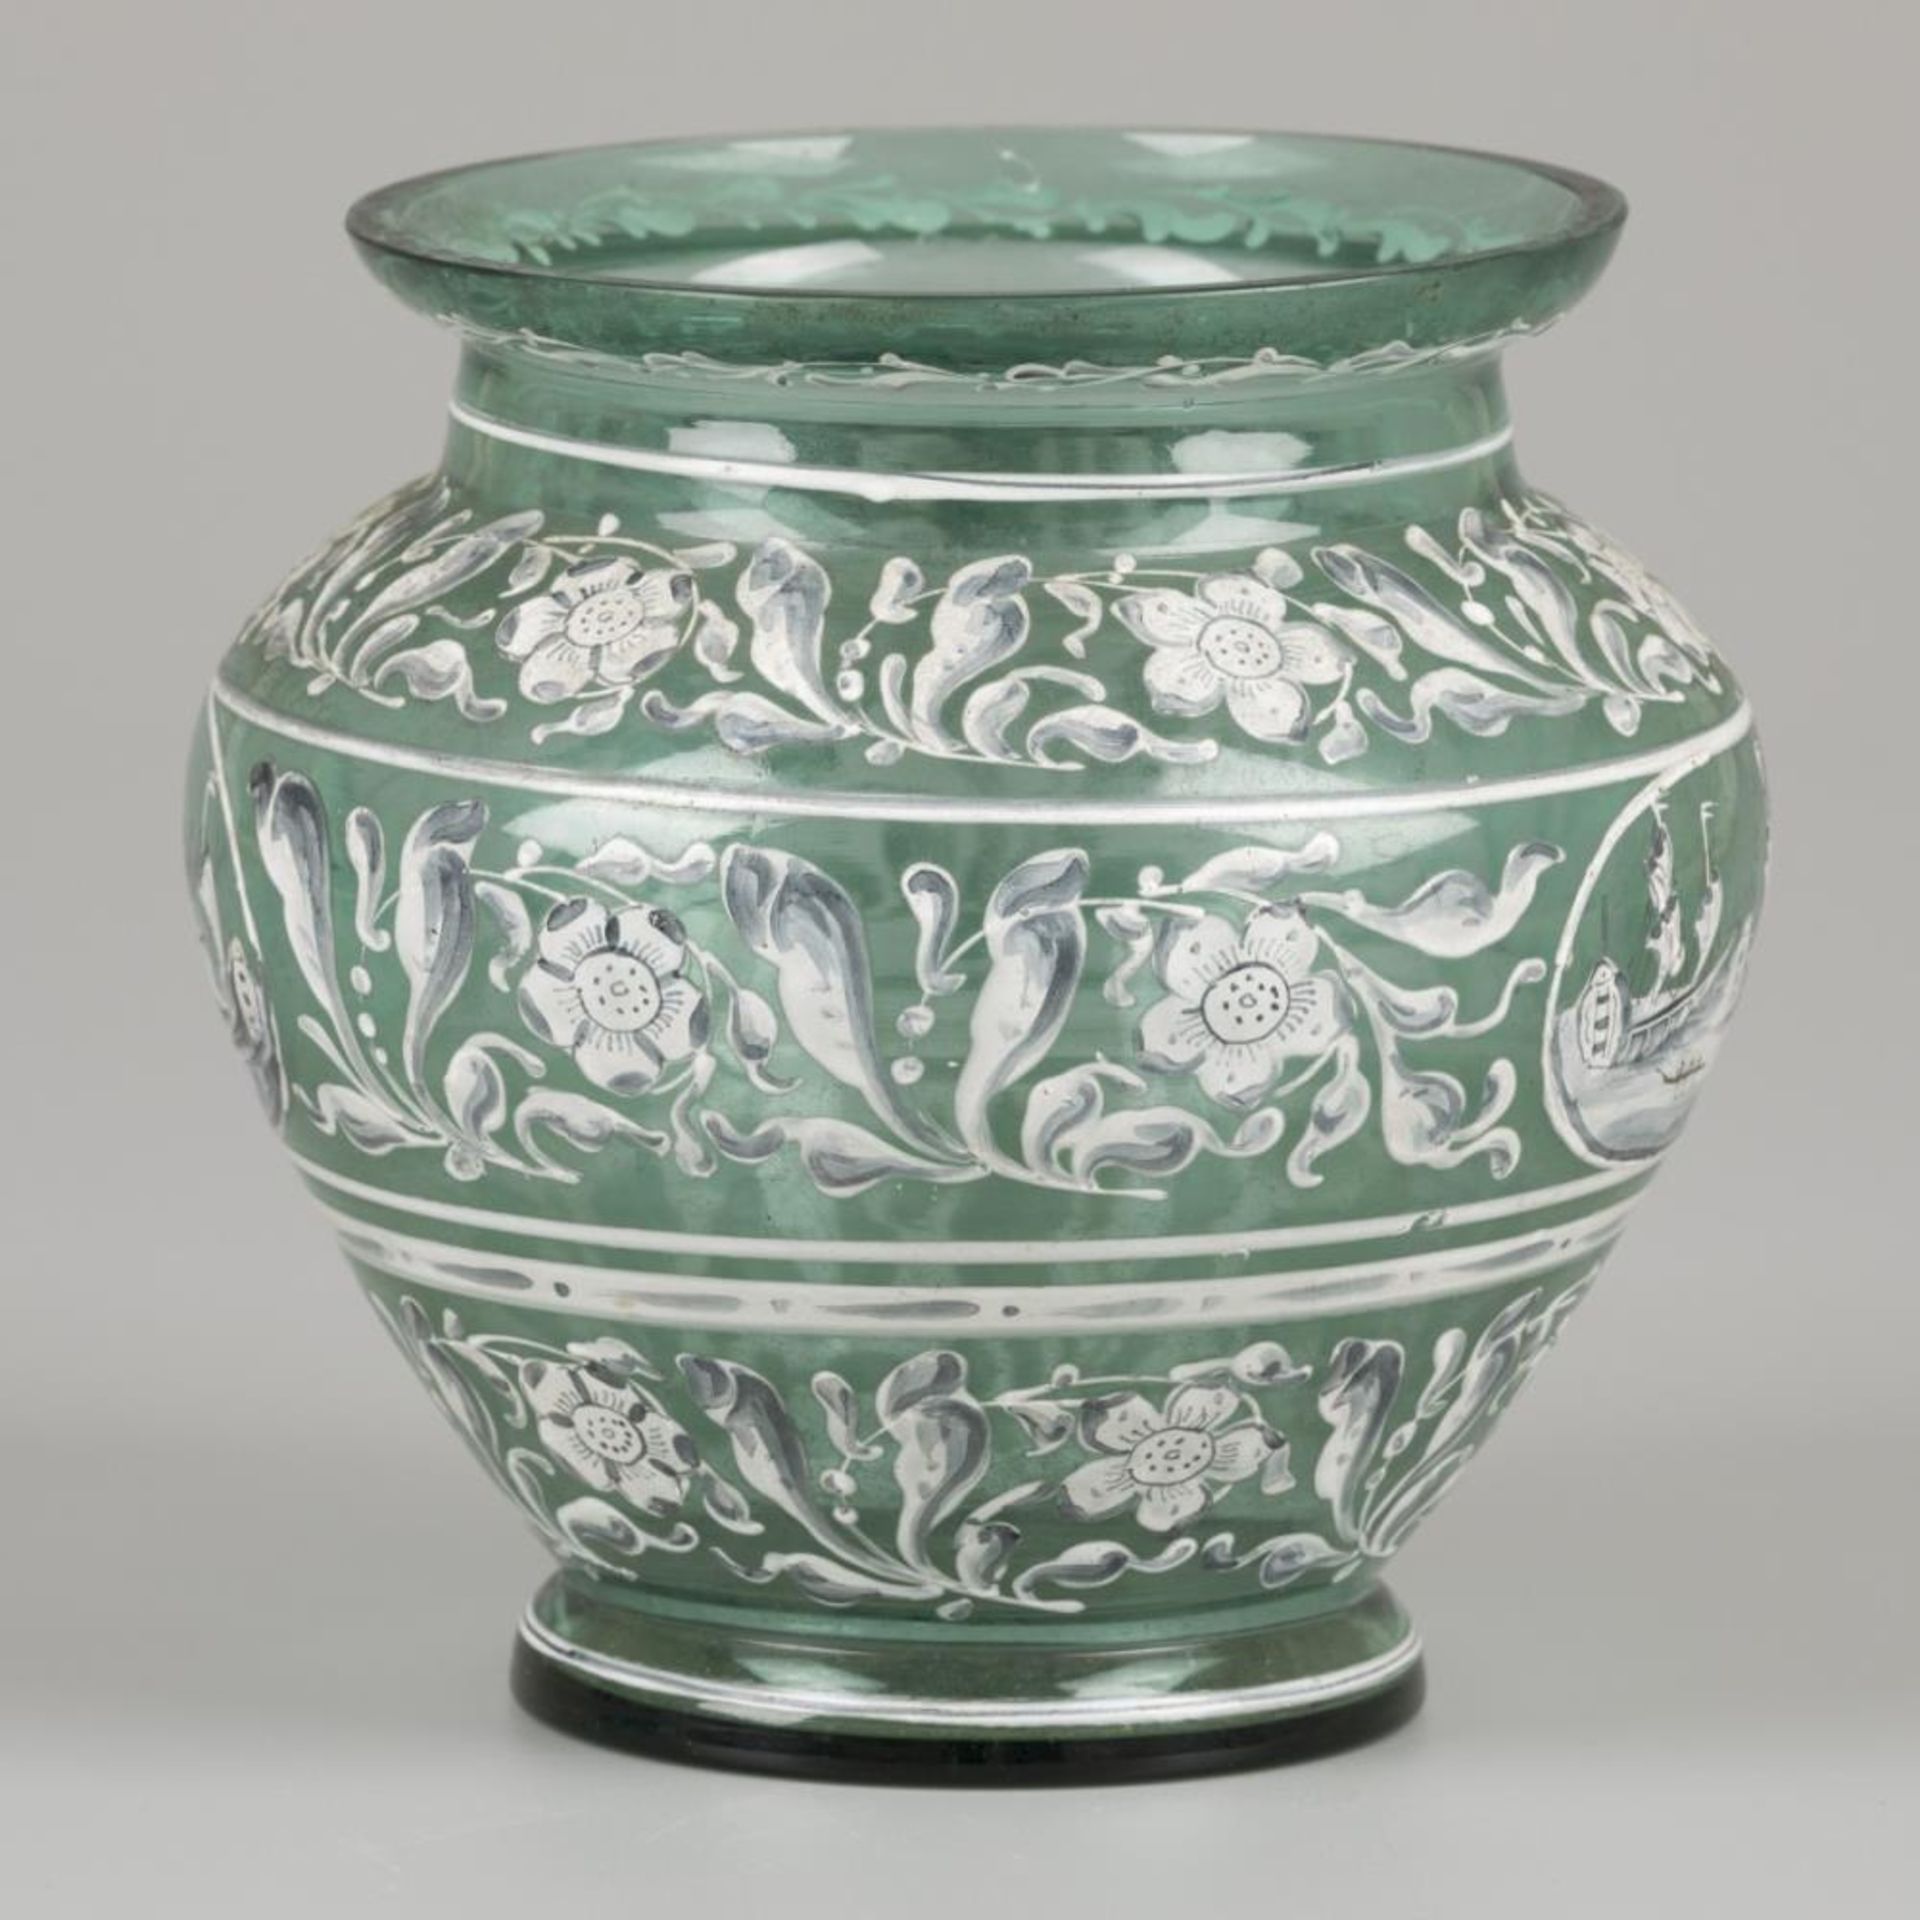 A glass vase with enamelled motif, Italy, 19th century. - Image 3 of 7